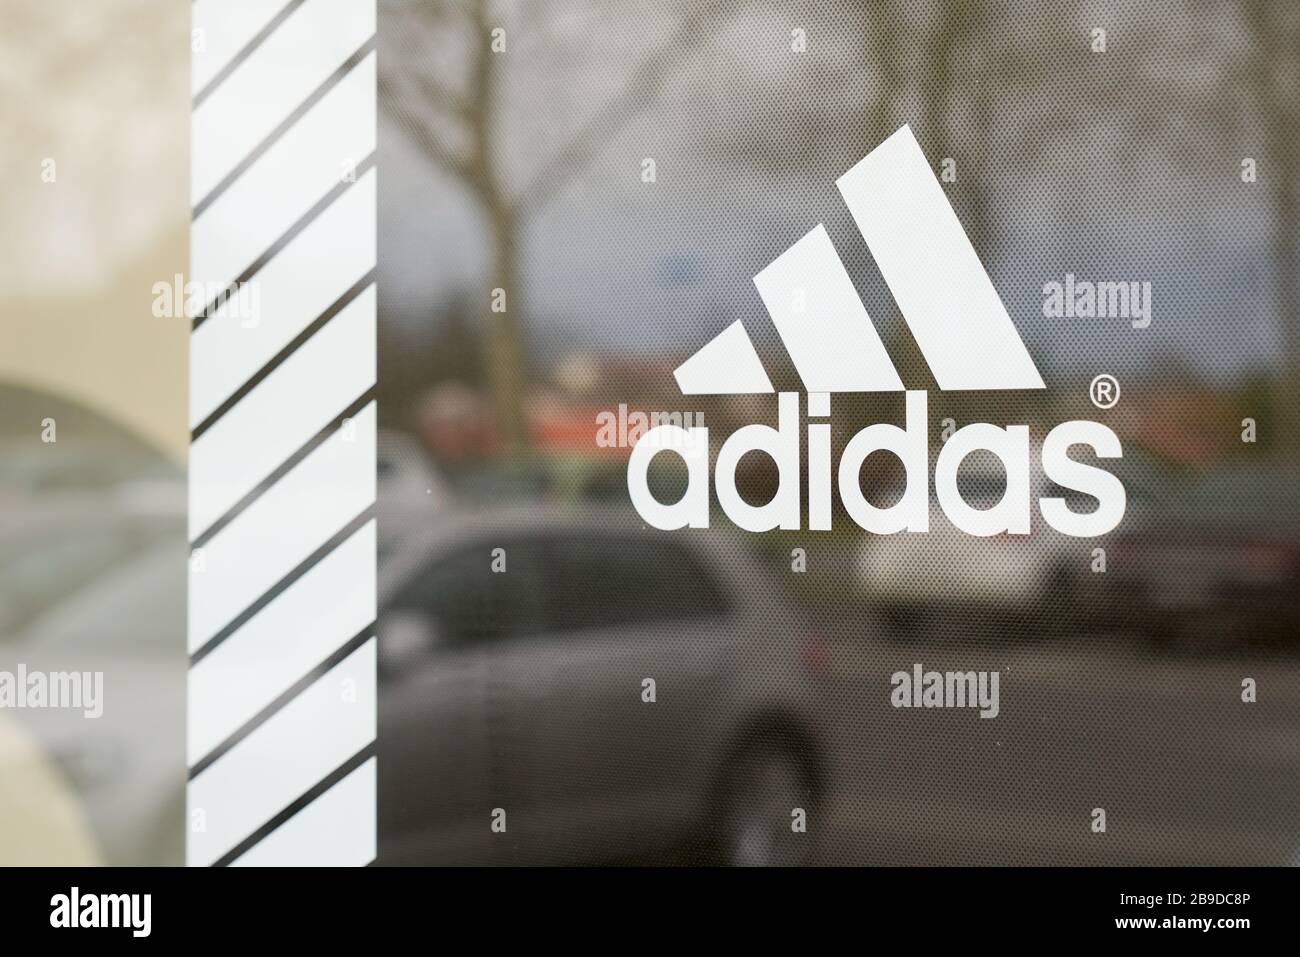 Adidas Store France High Resolution Stock Photography and Images - Alamy